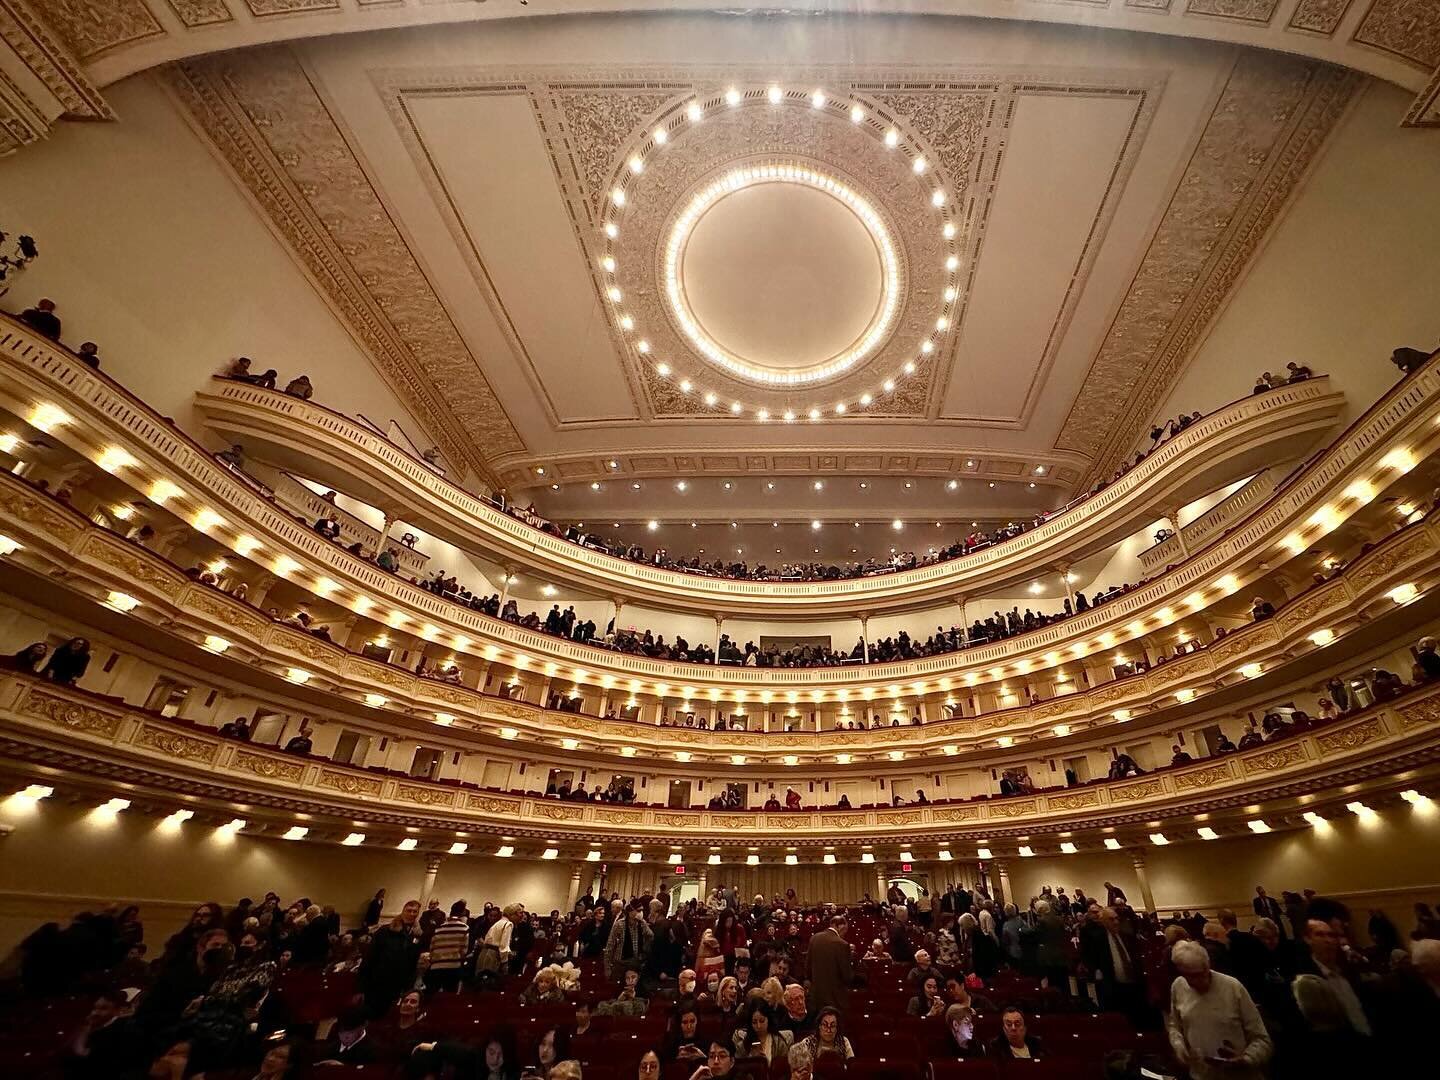 Last night&rsquo;s performance was the @rotterdamphilharmonic with guest pianist @daniiltrifonov at the famed @carnegiehall featuring a program of P&auml;rt, Mozart, and Prokofiev! 🎶✨